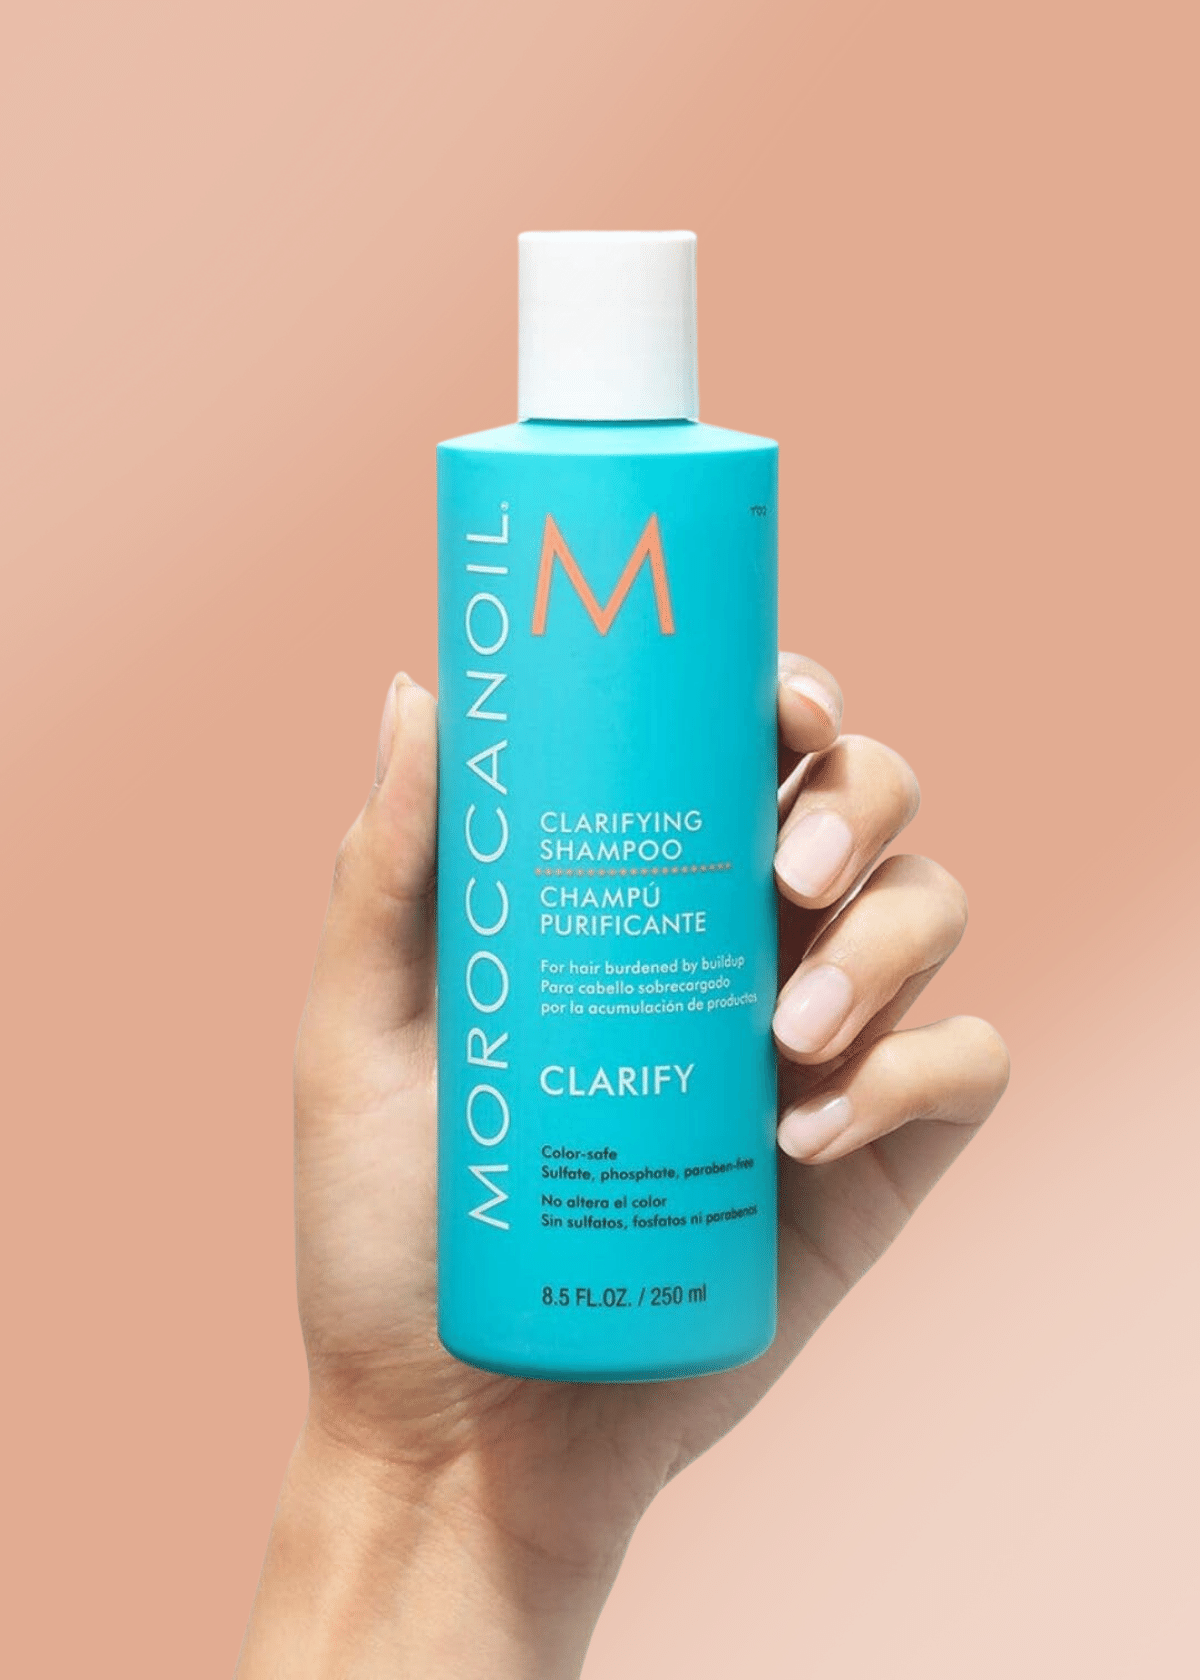 Moroccanoil Clarifying Shampoo Review: Banish Buildup for Healthy, Weightless Hair